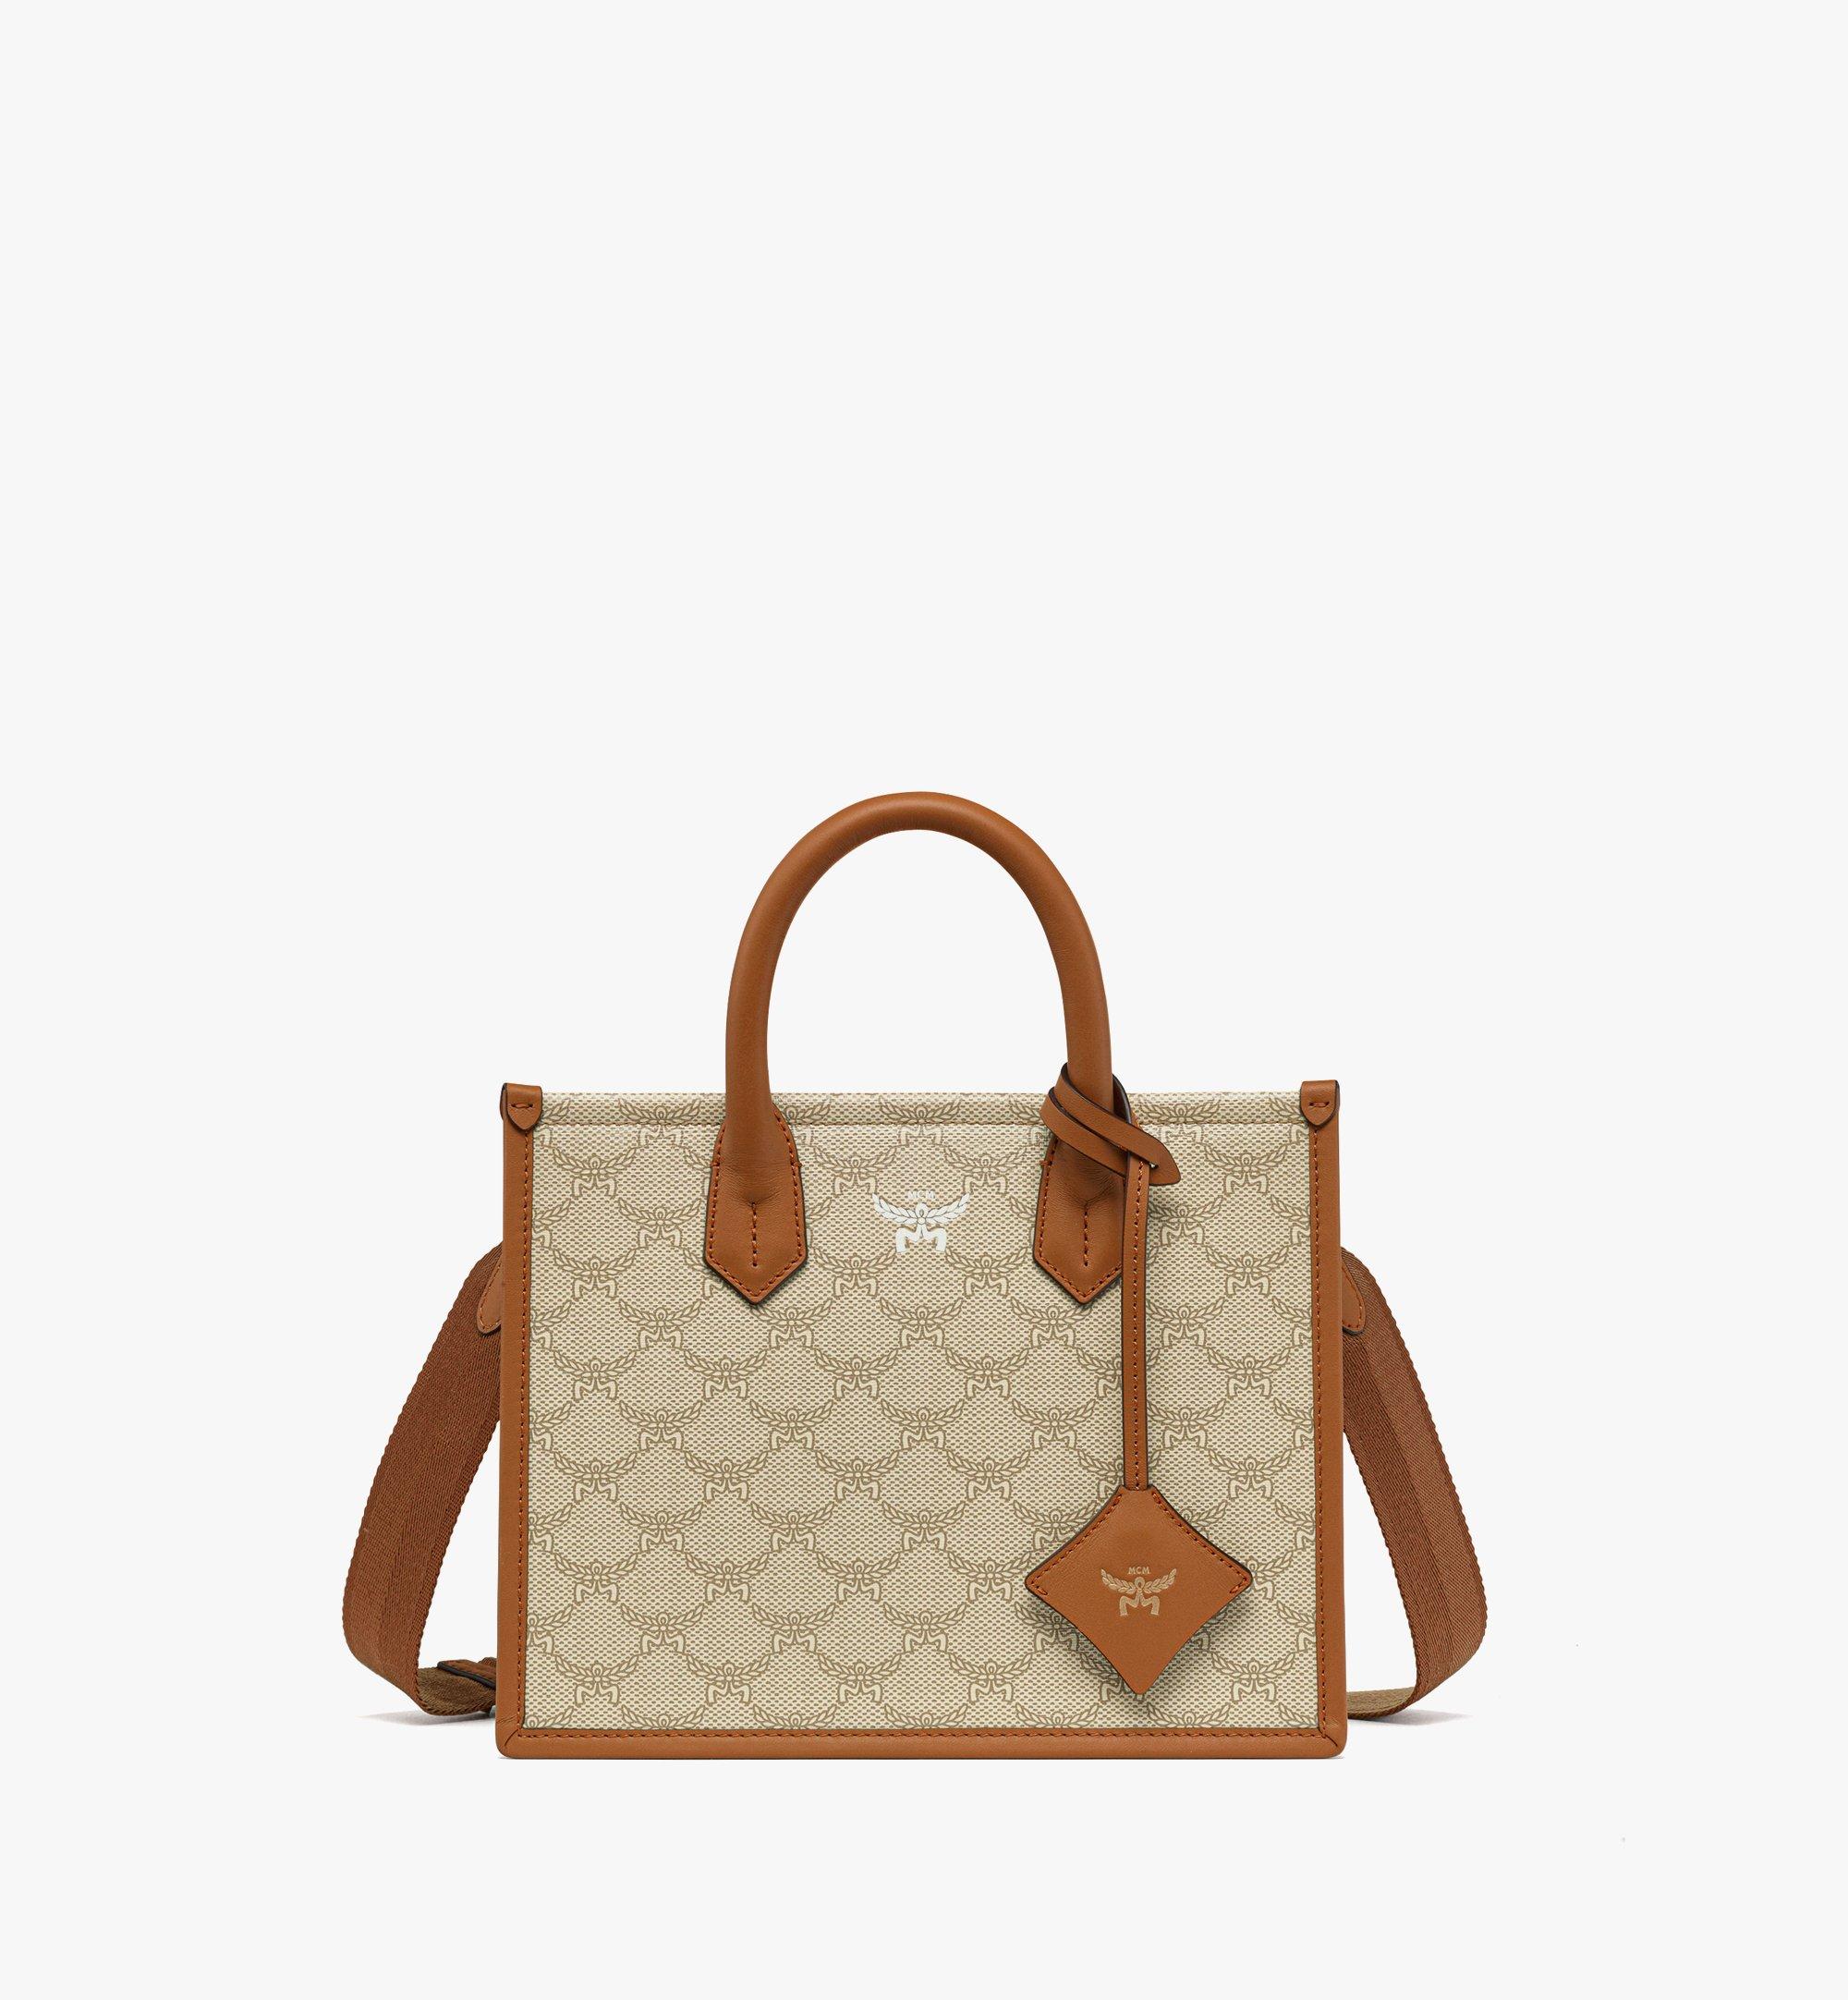 Louis Vuitton Granted A Design Patent for This Luggage Tote Bag